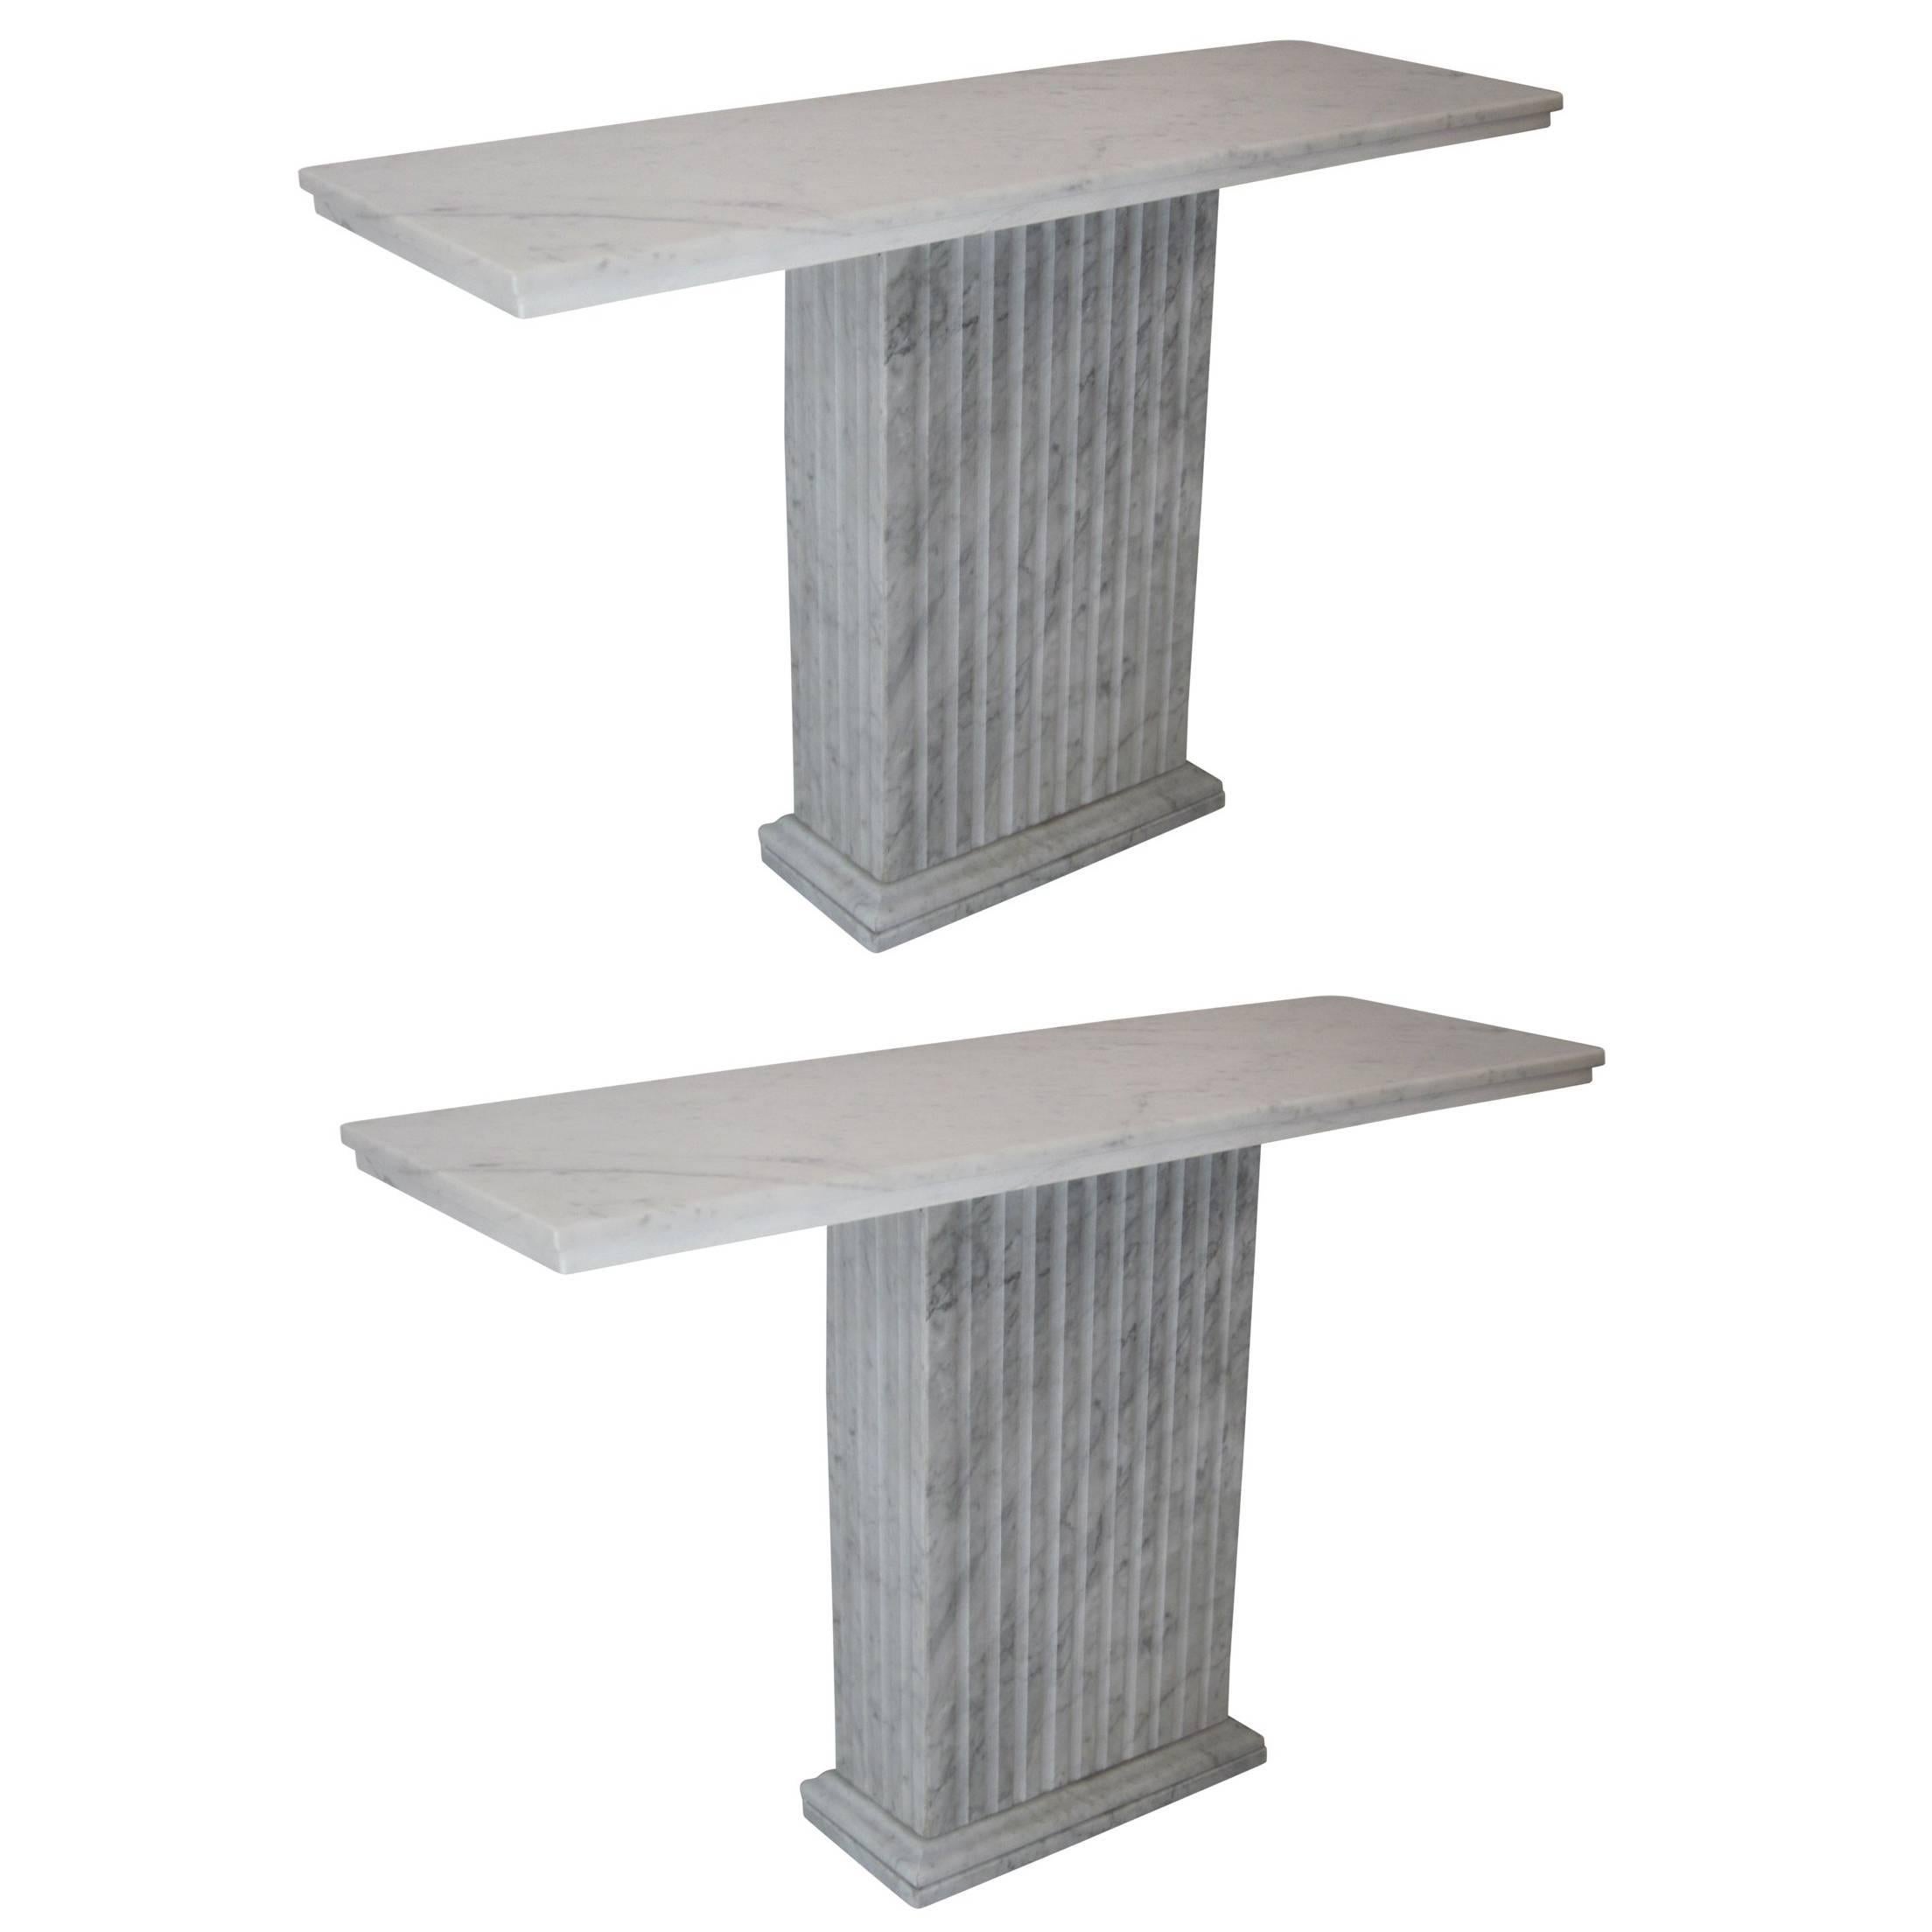 Timeless pair of Italian modern neoclassical marble consoles or sofa tables in the style of modernist architect Marcel Breuer. The pieces are in white Carrara marble and have perfect form, volume and lines reflecting elegance and total sobriety.